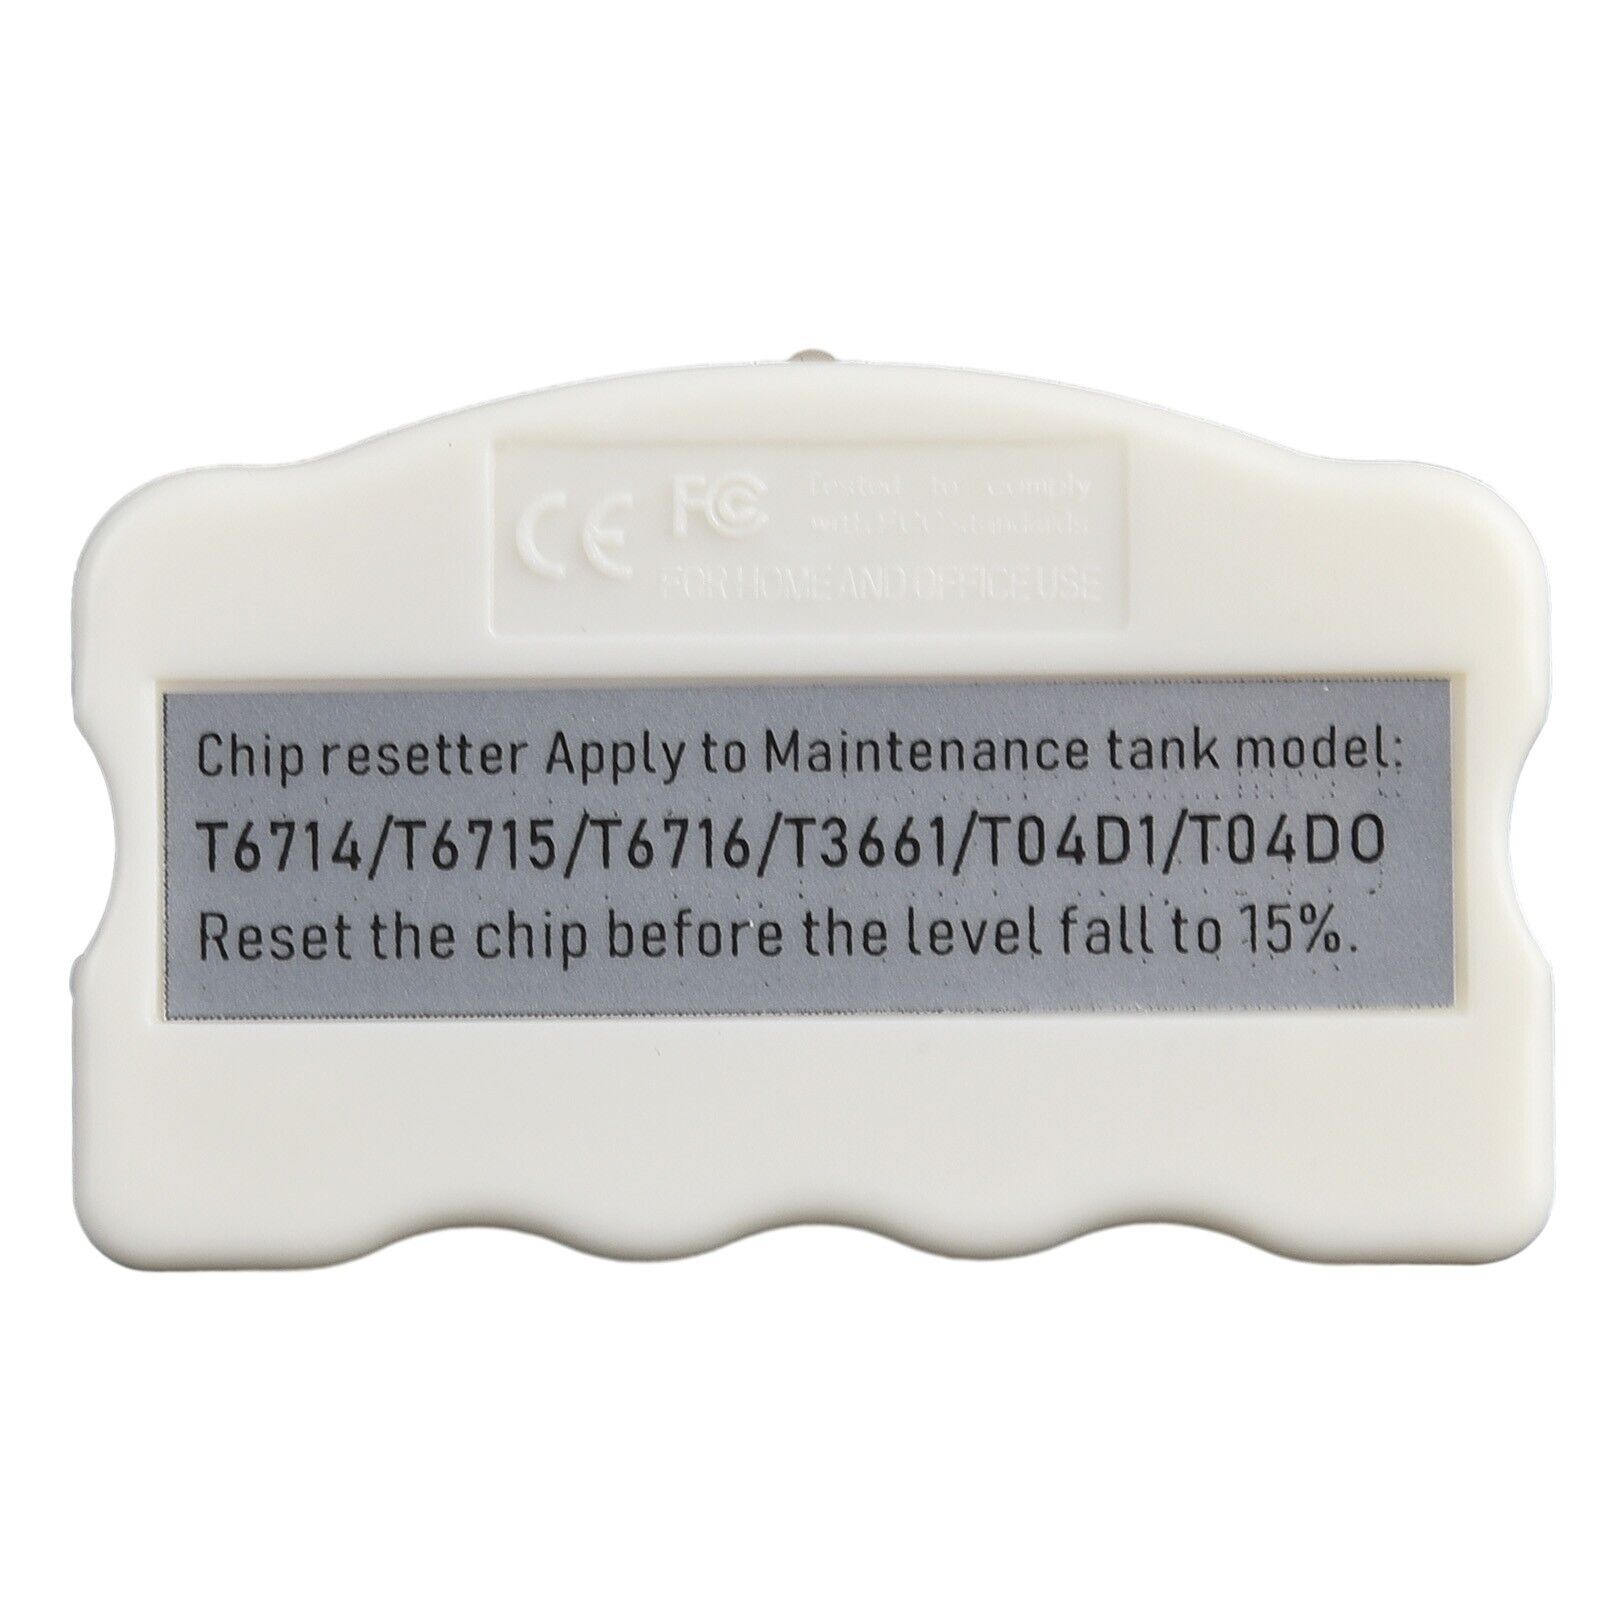 T3661 Waste Maintenance Tank Chip Resetter For  XP-6001 XP-6000 XP-6100